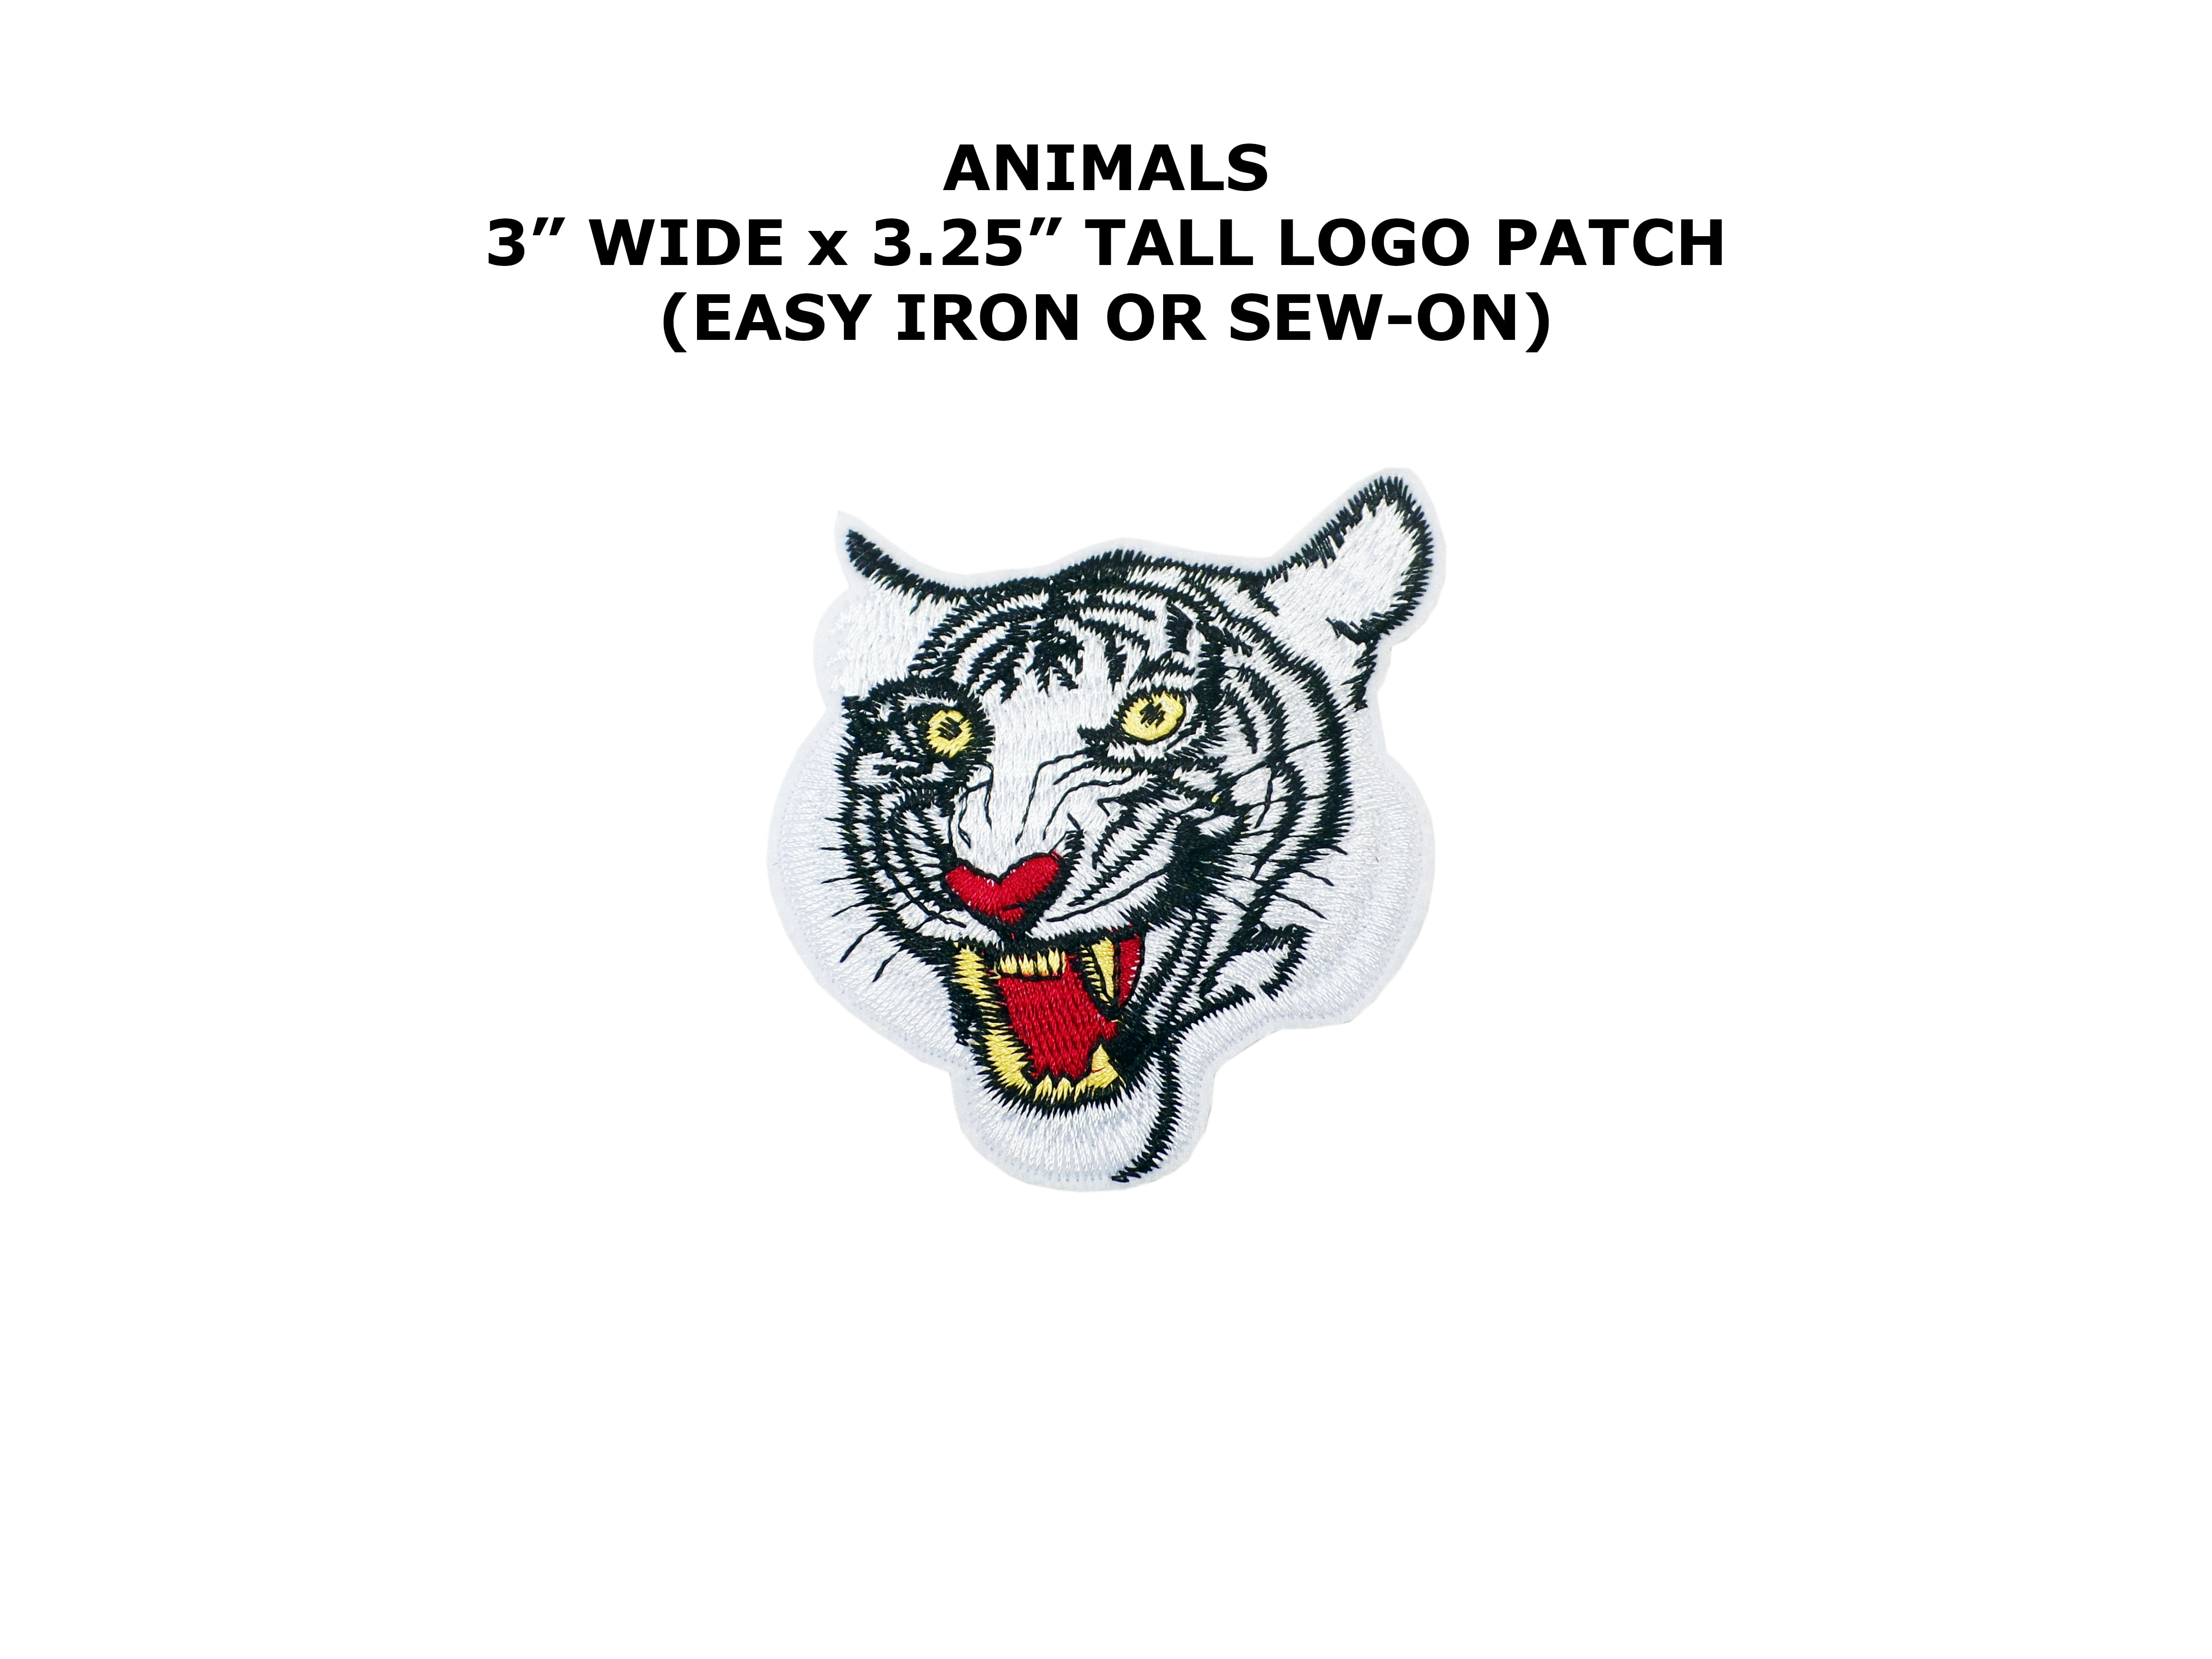 Black Panther Embroidered Patch Iron Sew-On Decorative Gear Applique